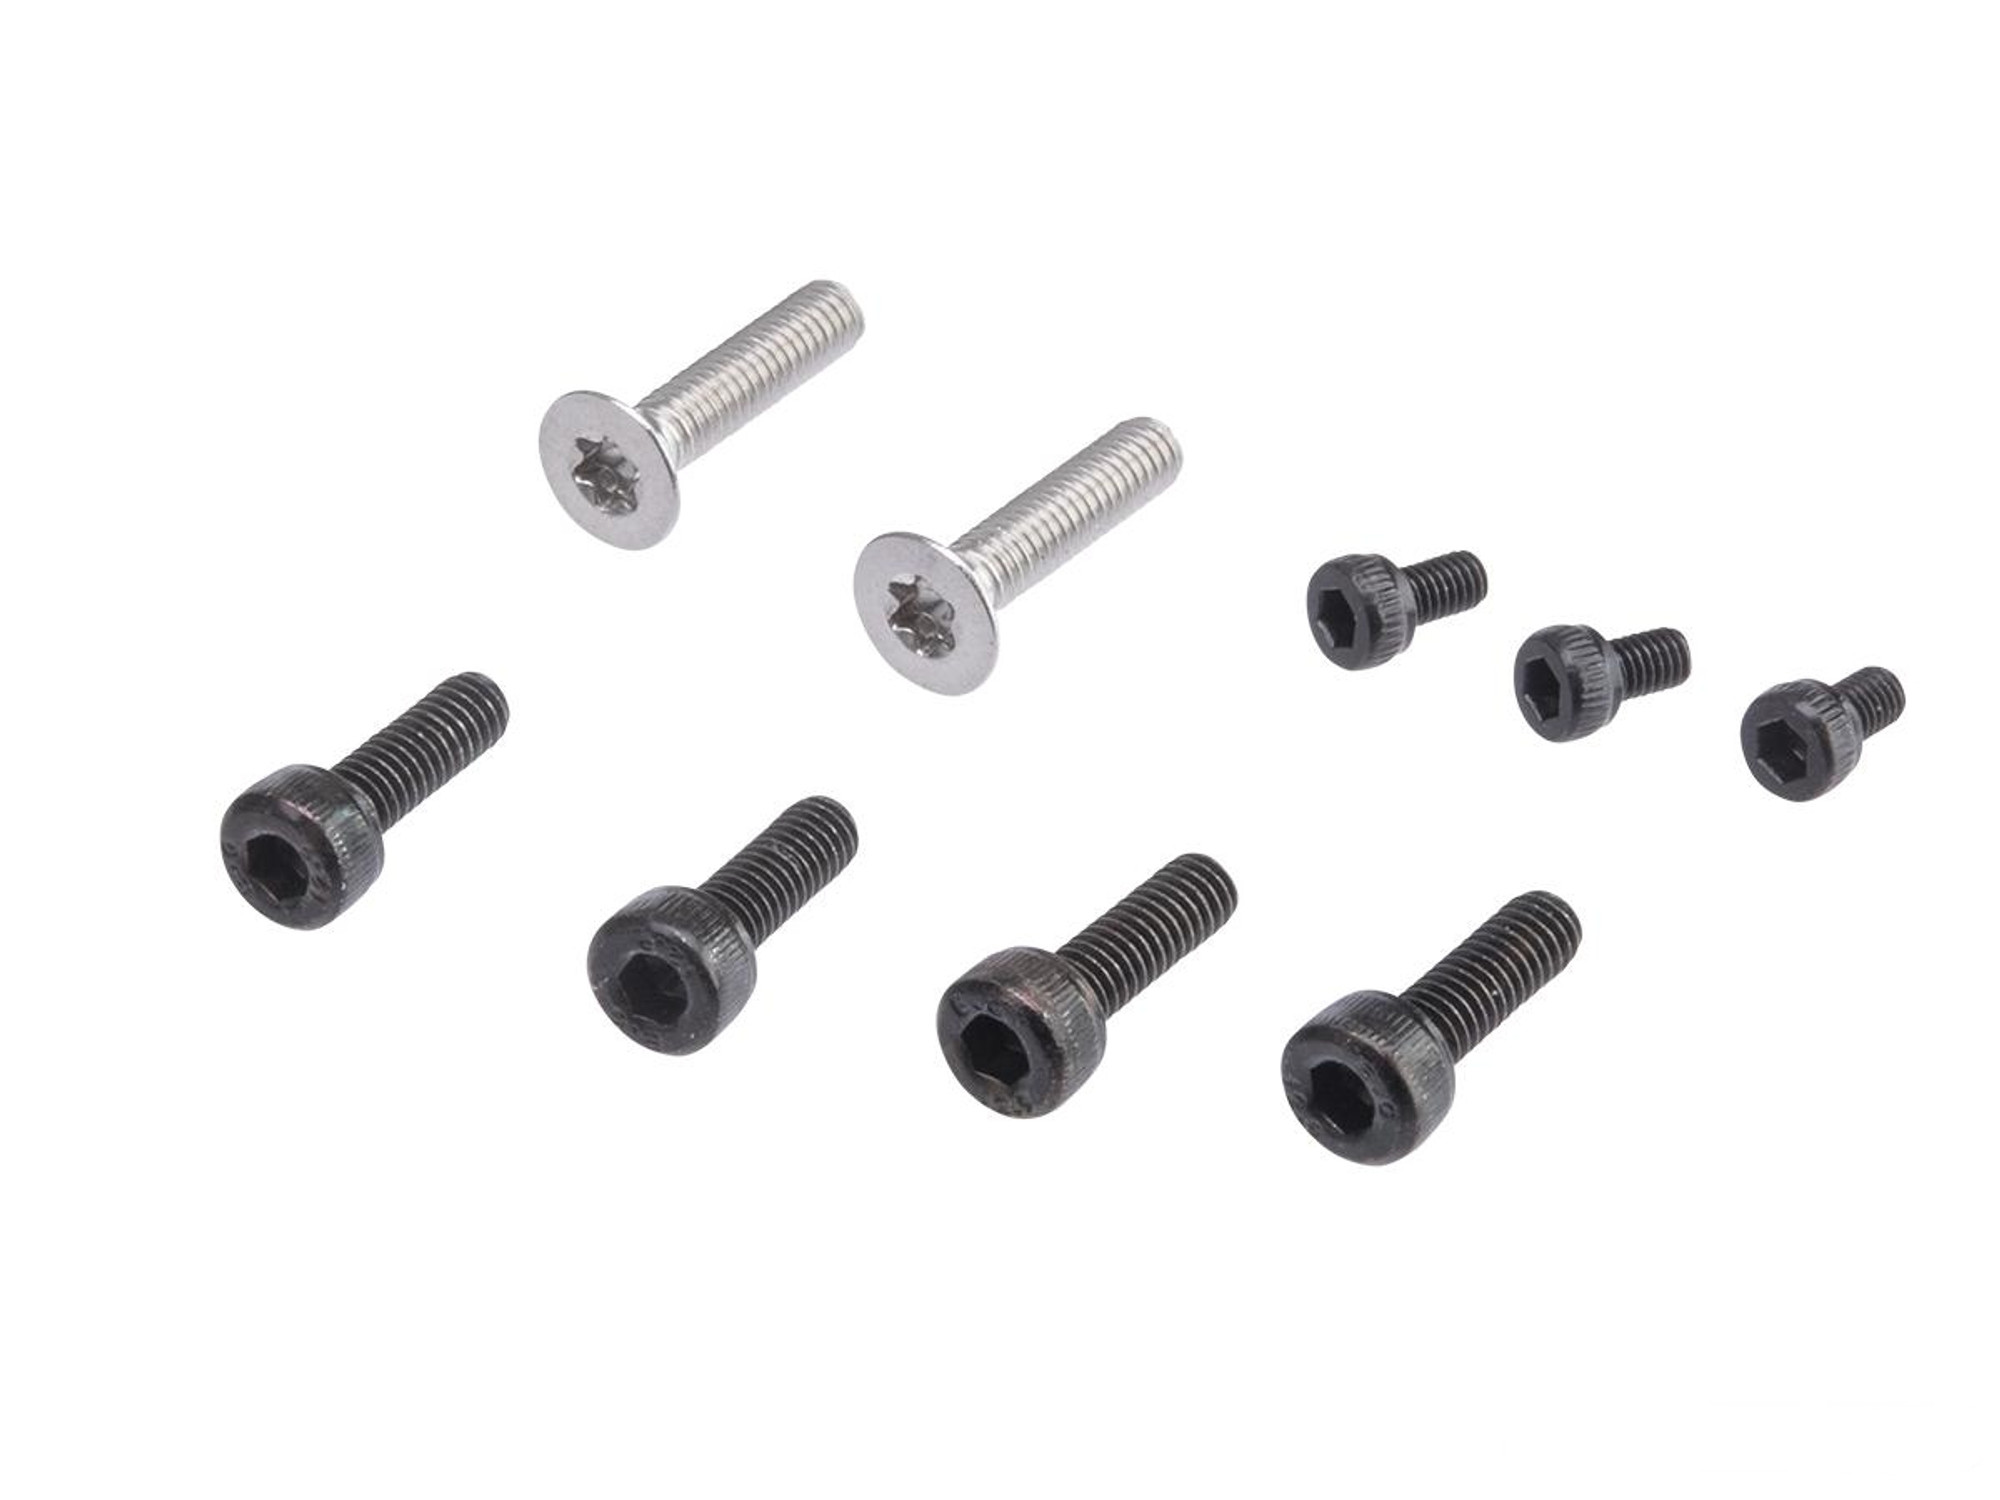 Silverback Airsoft Replacement Gearbox Screw Set for MDRX Airsoft AEG Rifles